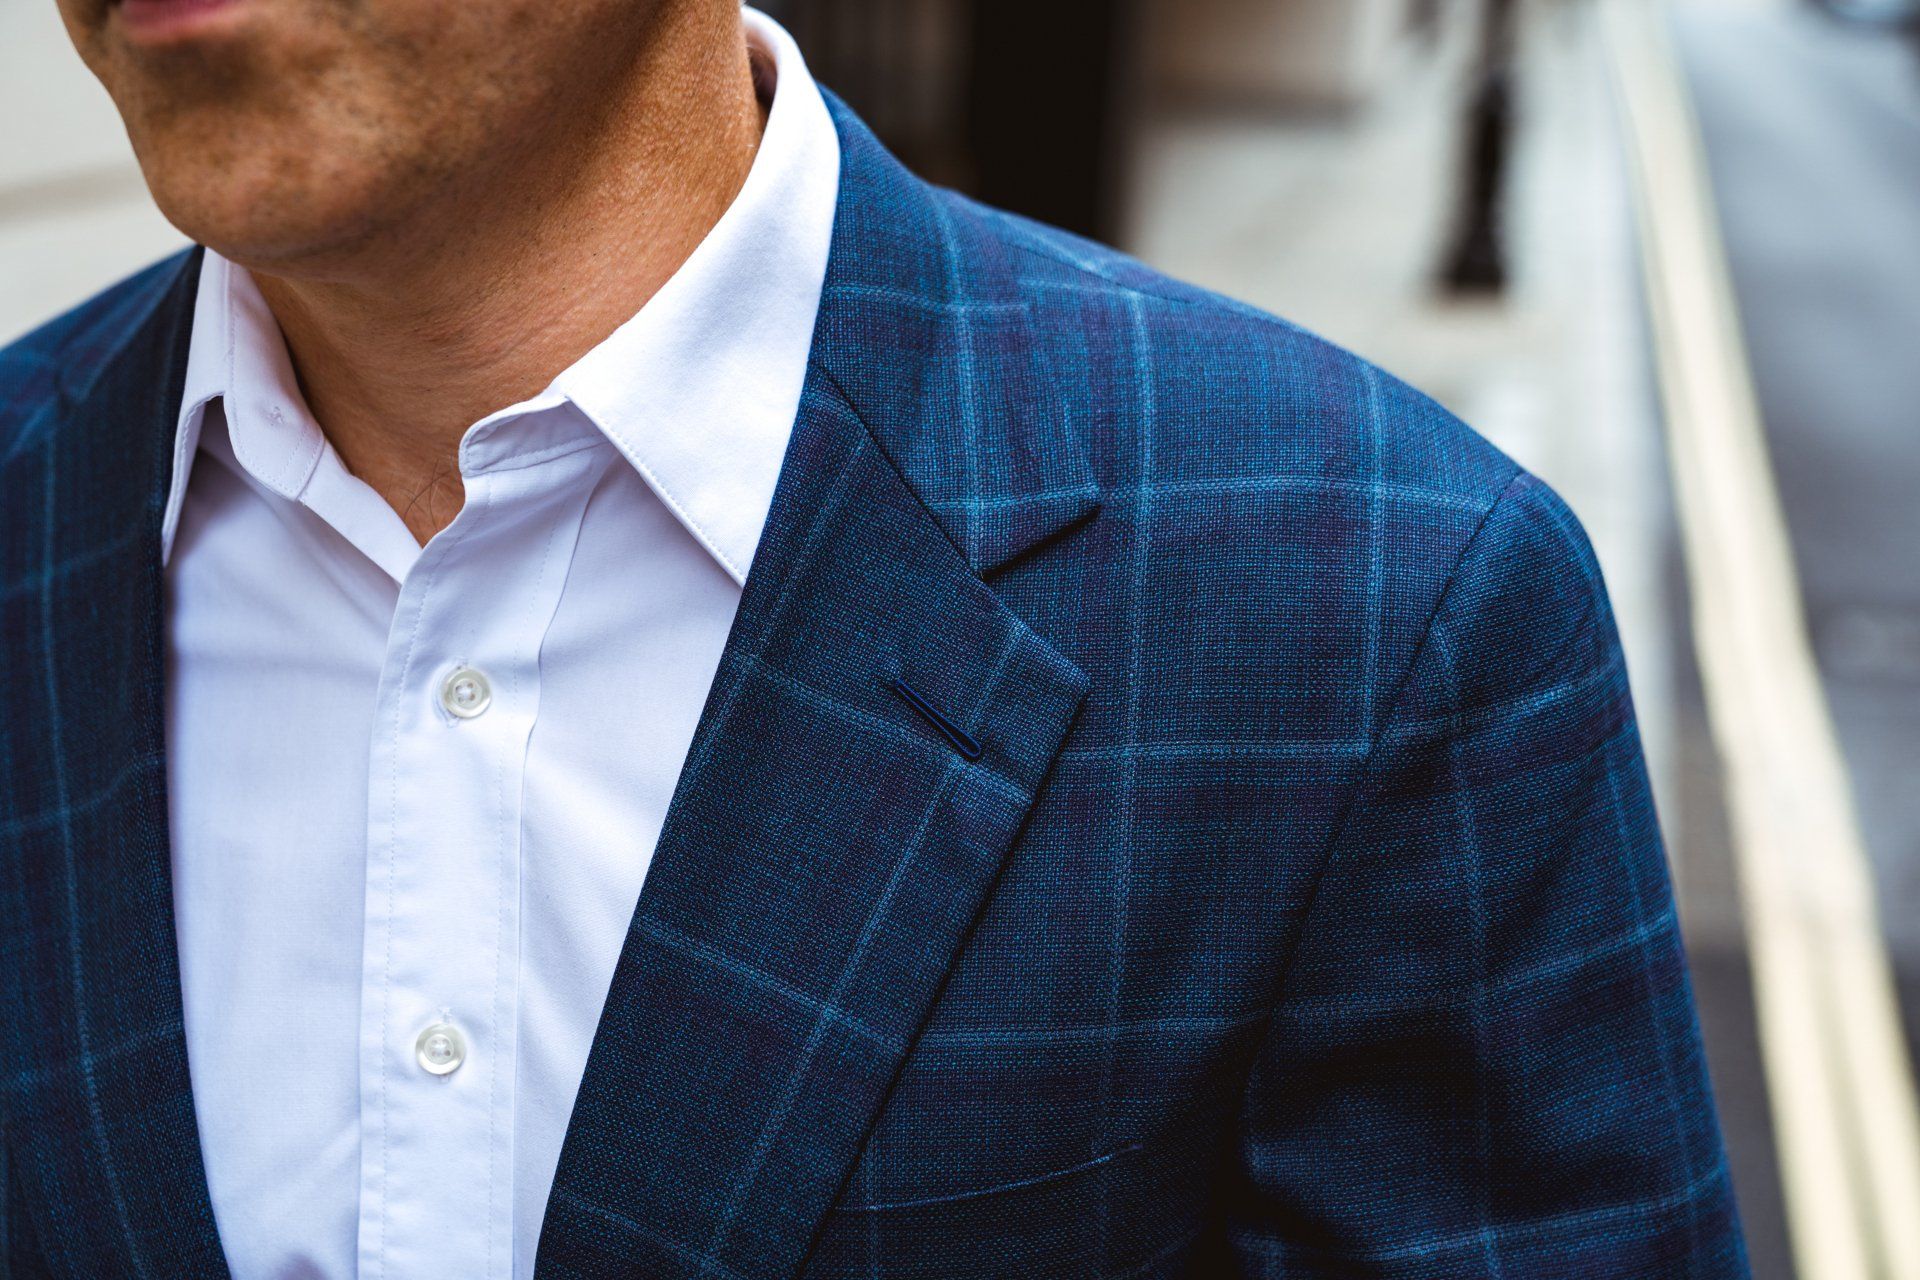 Why sports jackets are your summer staple - unstructured blazers from Adam James Bespoke tailoring